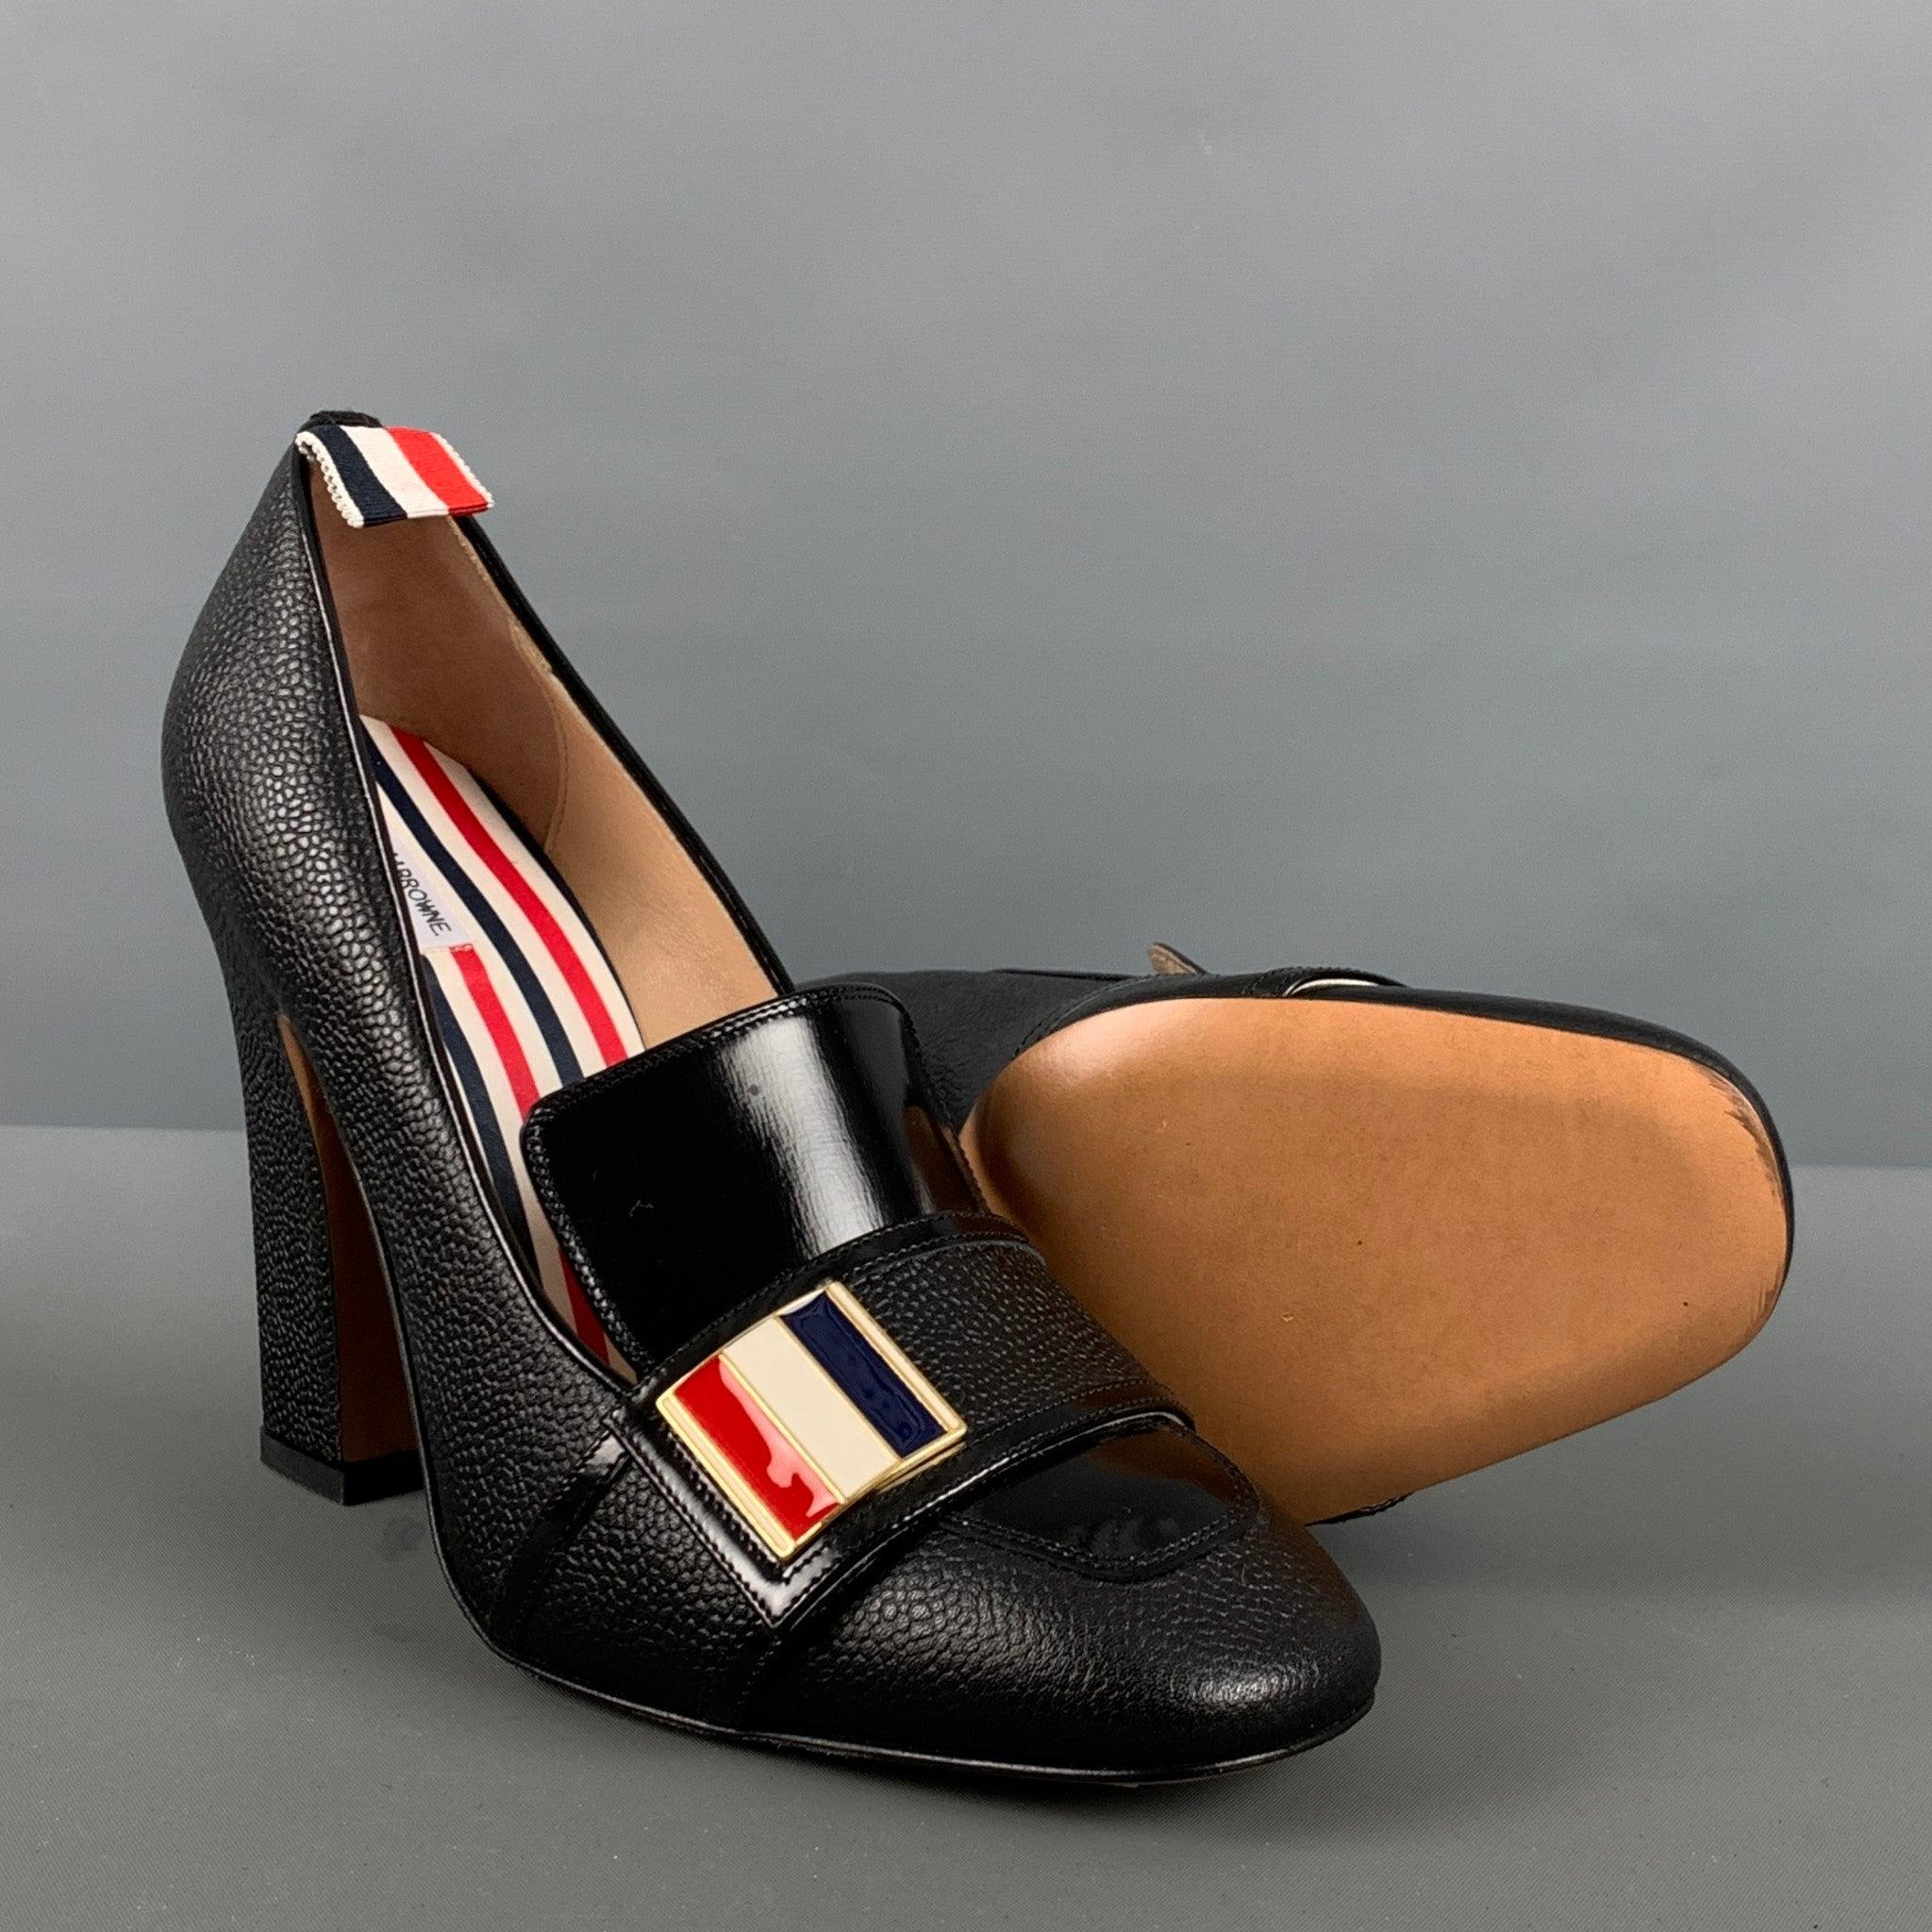 THOM BROWNE Size 8 Black Red & White Leather Mixed Materials Pebble Grain Pumps For Sale 1